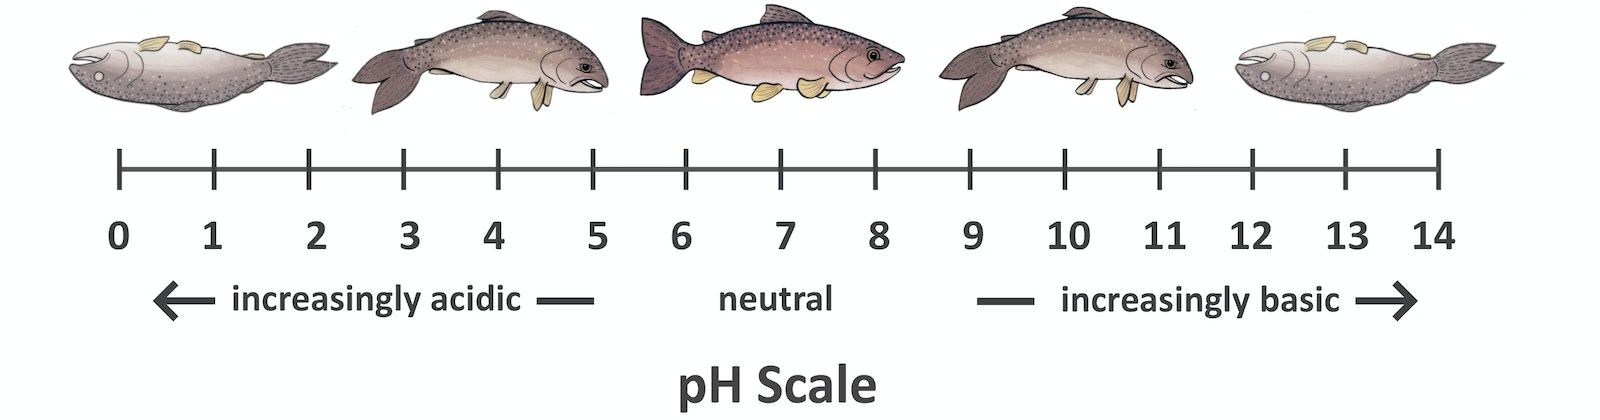 pH scale showing fish health at various stages between 0 (very acidic) and 14 (very basic). Unhealthy fish are shown at both ends of the spectrum with fish health improving at near-neutral pH levels.